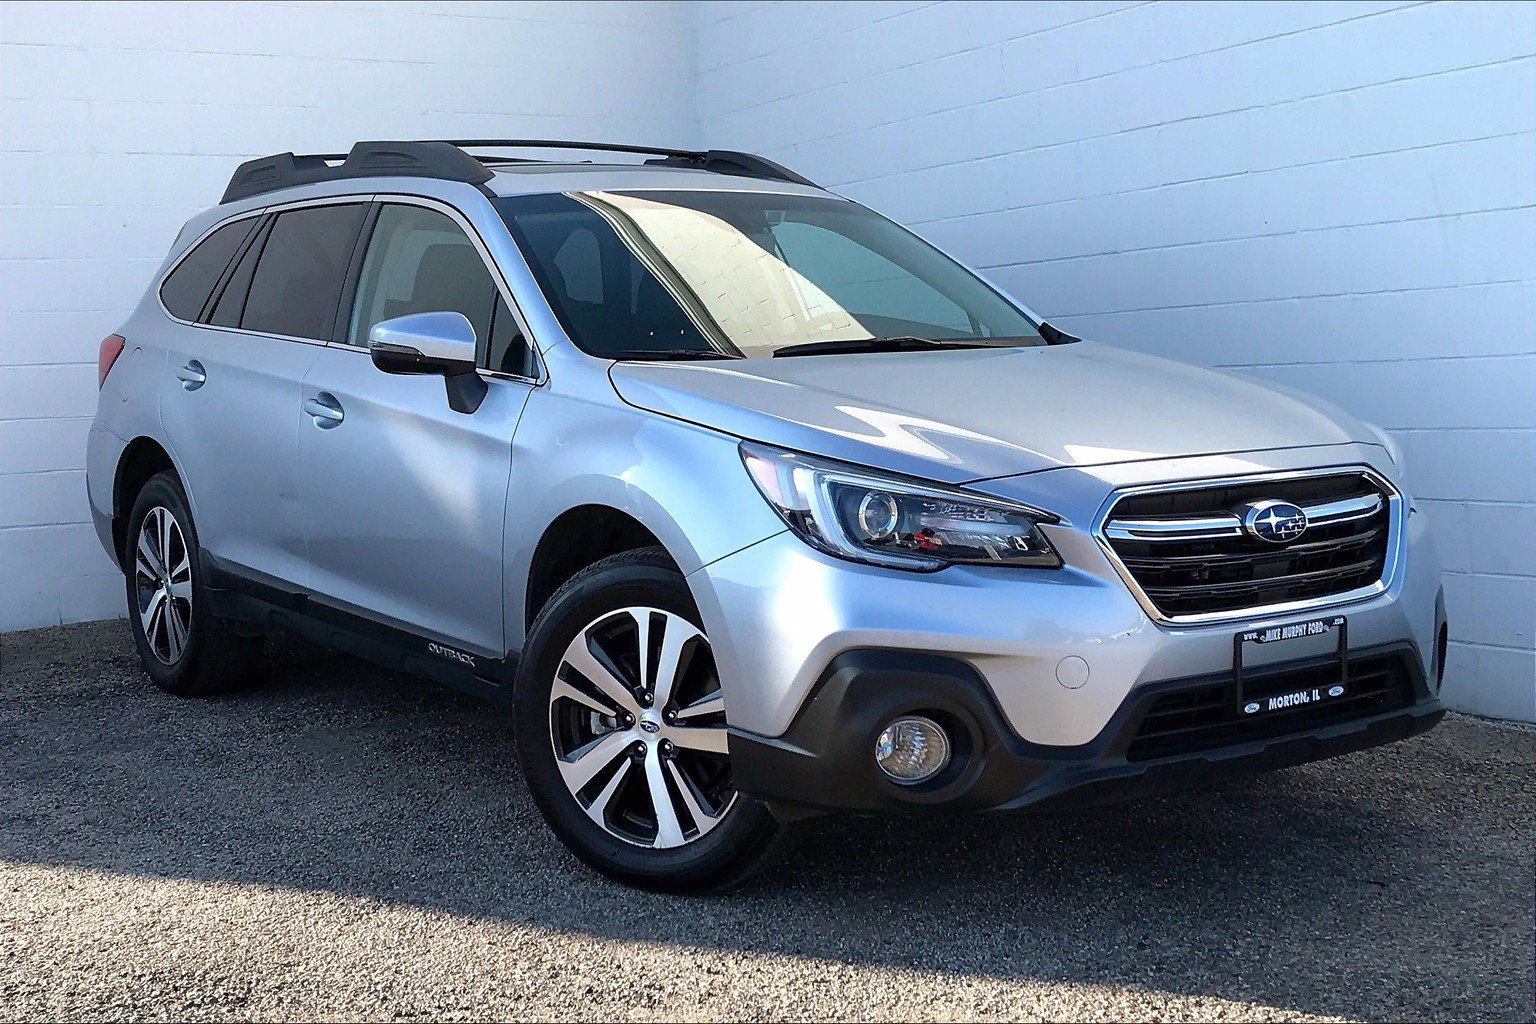 PreOwned 2019 Subaru Outback 2.5i 4D Sport Utility in